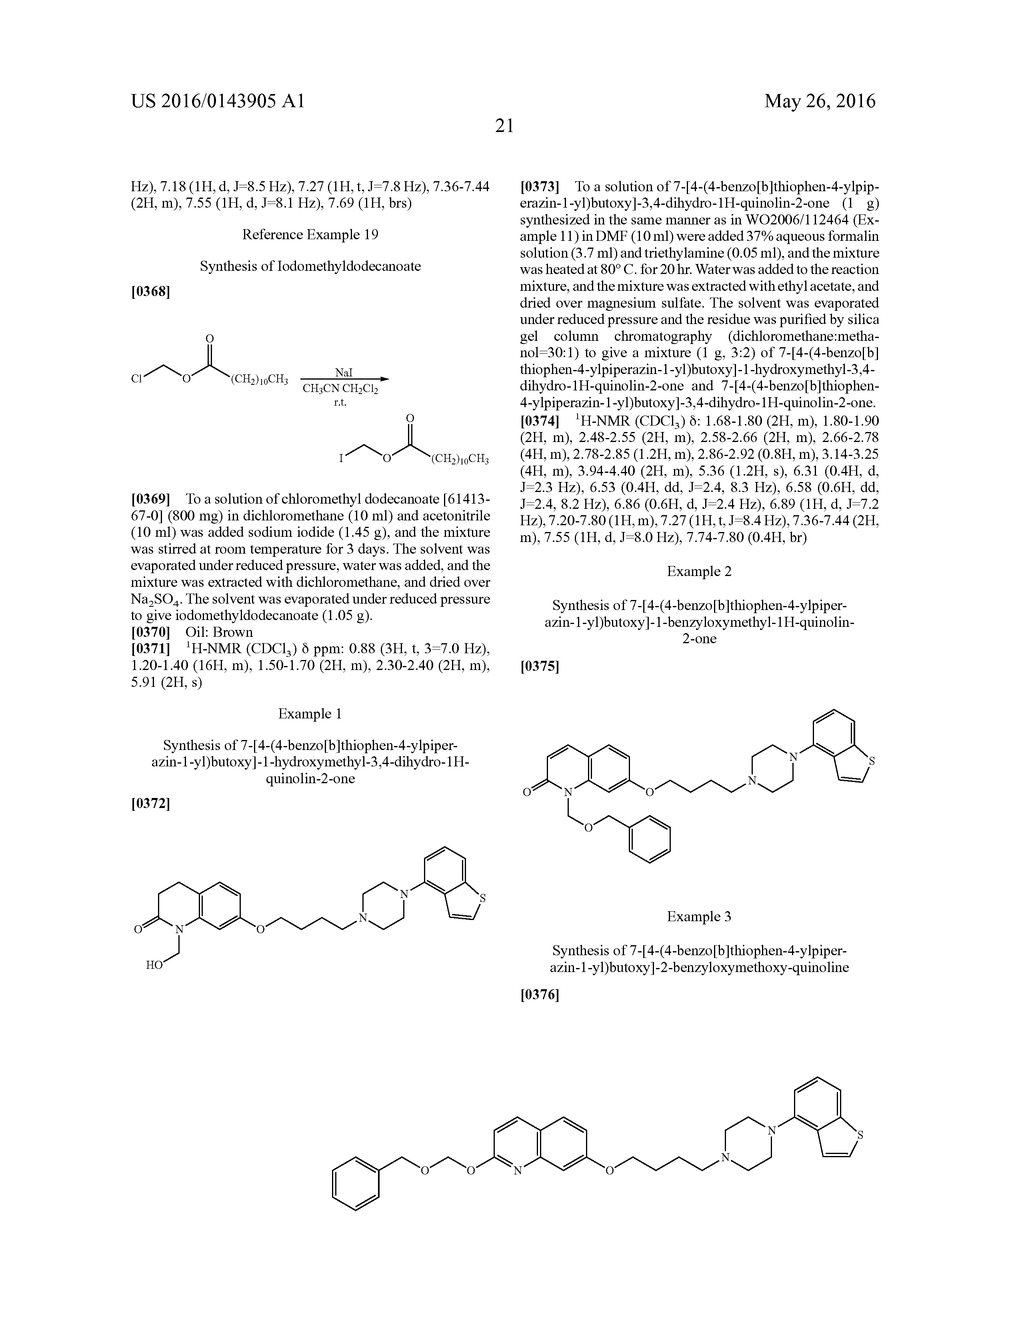 PIPERAZINE-SUBSTITUTED BENZOTHIOPHENE DERIVATIVES AS ANTIPSYCHOTIC AGENTS - diagram, schematic, and image 23